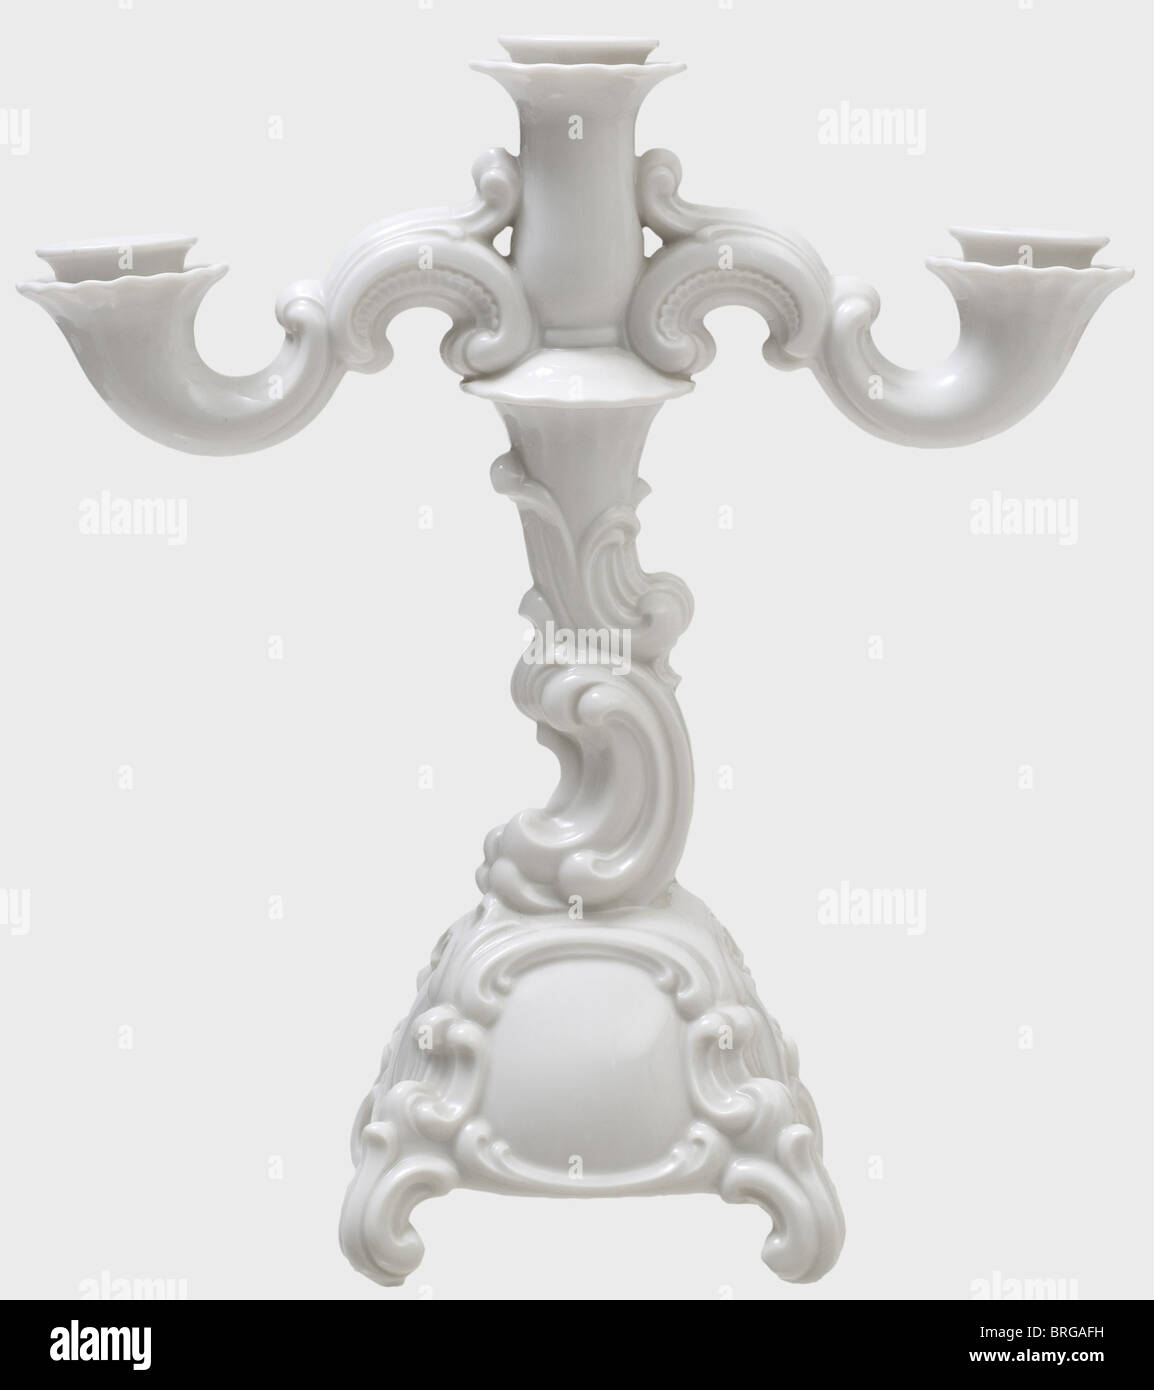 A pair of three branch Baroque candelabras, Allach Porcelain Factory Design by Franz Nagy. Model Number 21. White, glazed porcelain. On the bottom in underglaze green the manufacturer's mark in an octagon. Height 32 and 33 cm. Absolutely undamaged., historic, historical, 1930s, 1930s, 20th century, object, objects, stills, clipping, clippings, cut out, cut-out, cut-outs, Additional-Rights-Clearences-Not Available Stock Photo